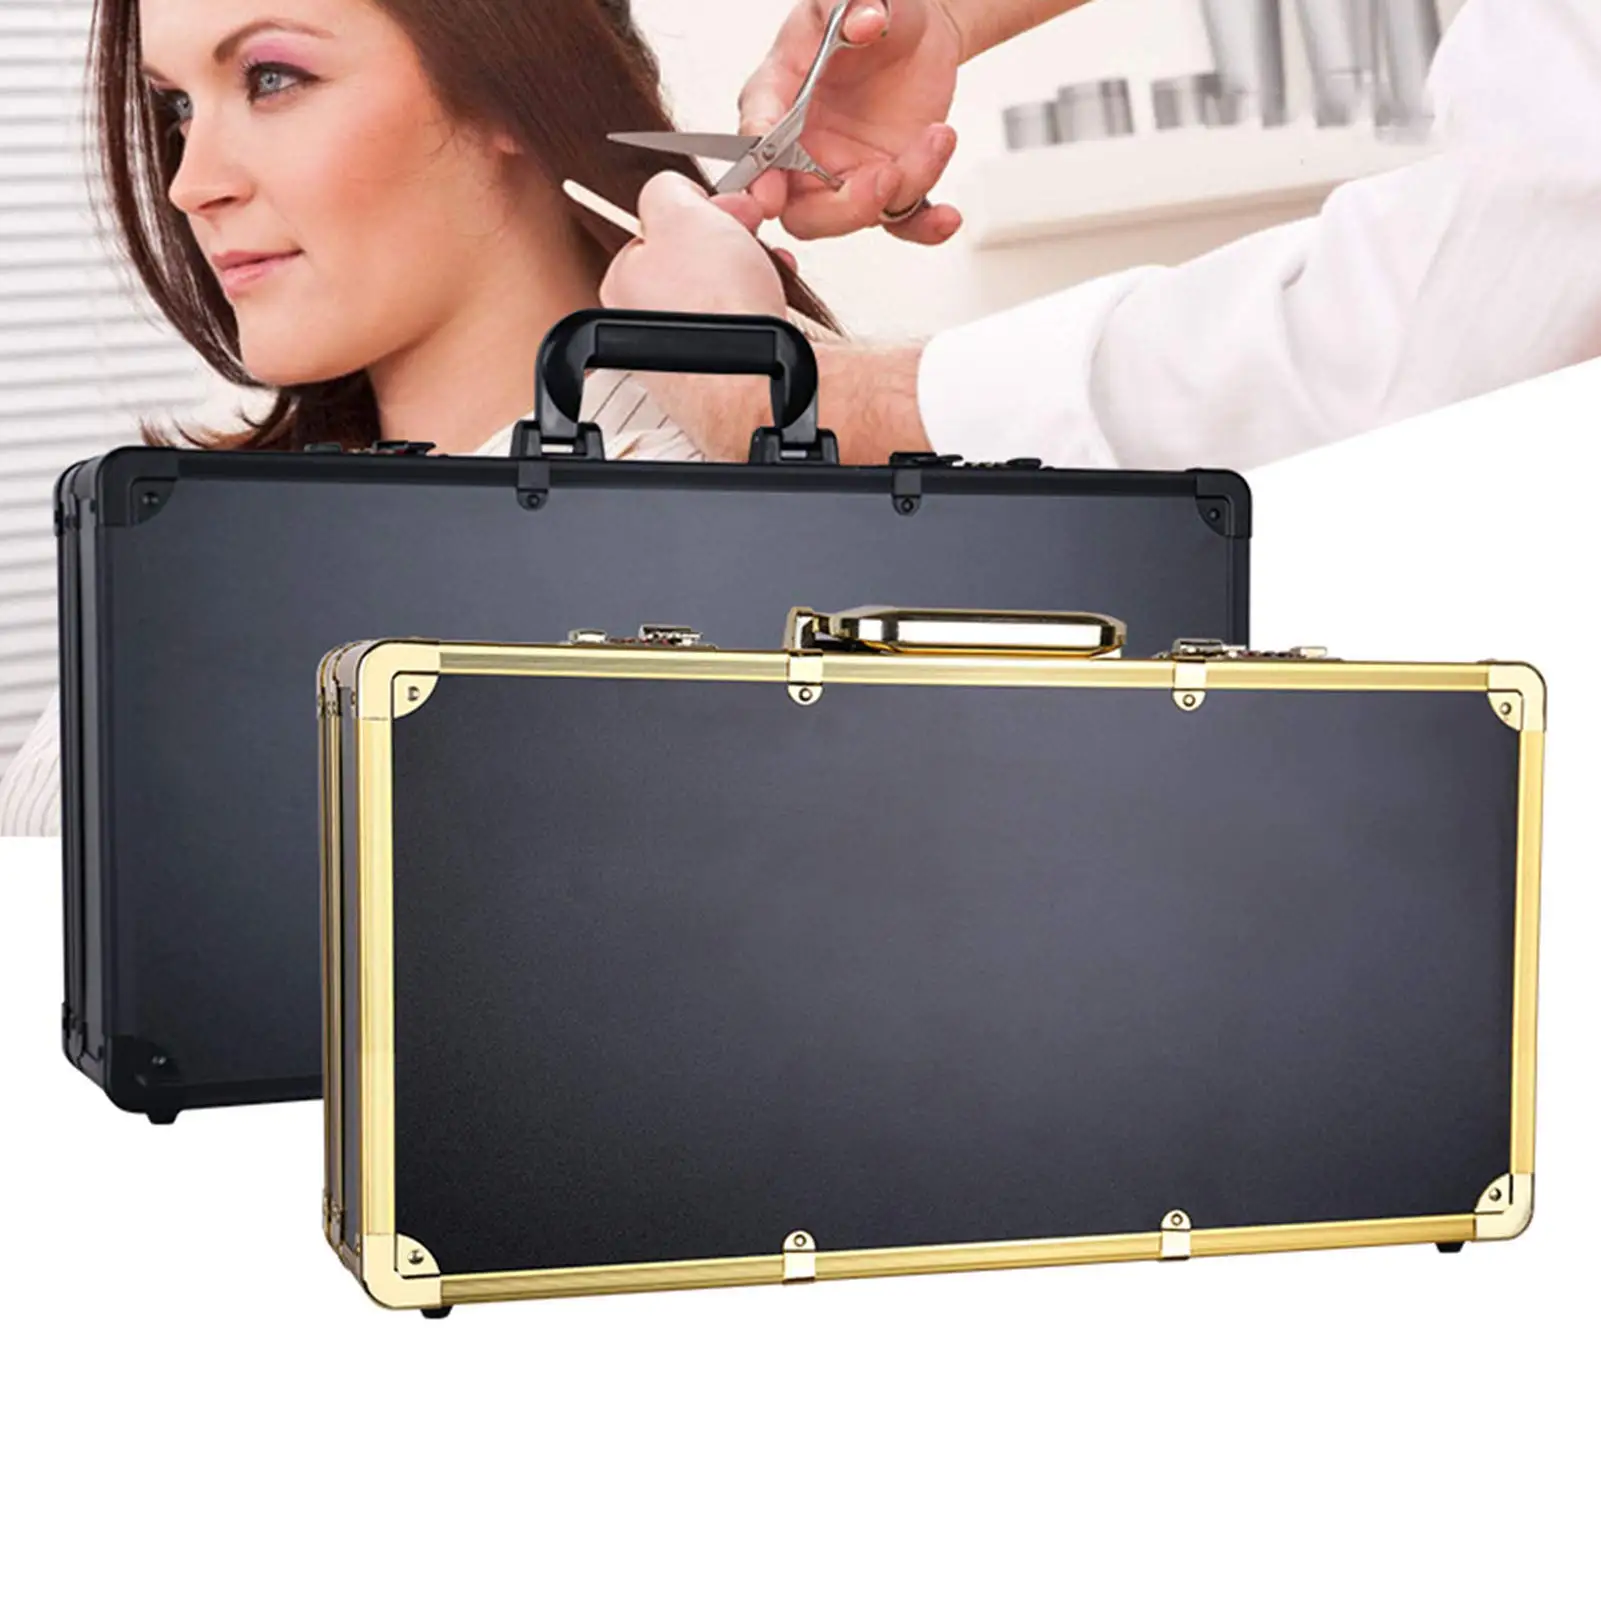 Professional Barber Aluminum Case Hairdressing Toolbox Large Capacity Travel Suitcase With Combination Lock Cosmetic Box small bag padlock rectangle shape purse lock with key lock for suitcase bag accessories